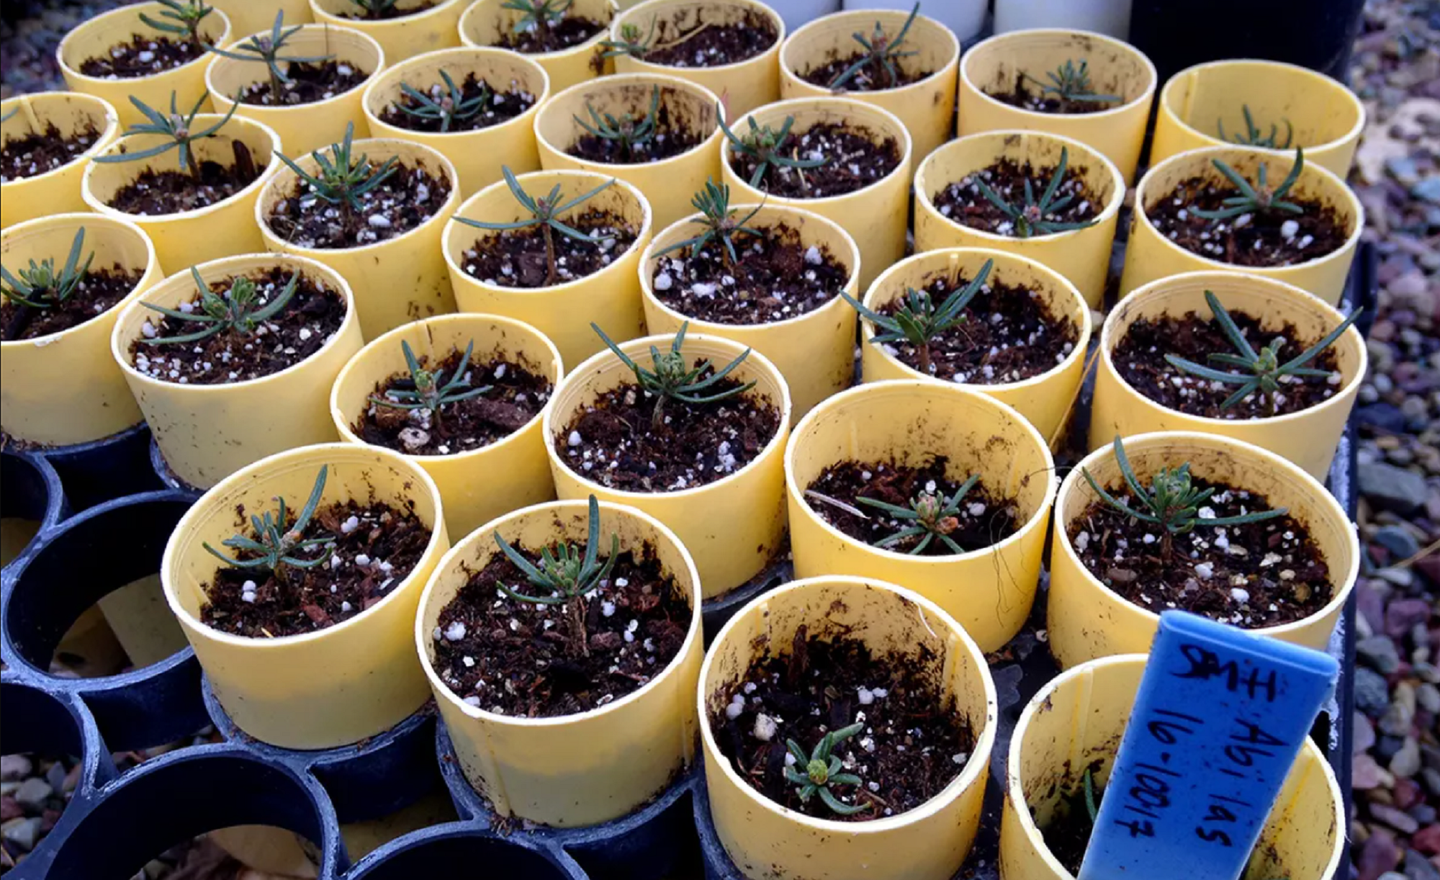 Seedlings in yellow pots at a plant nursery in Glacier National Park